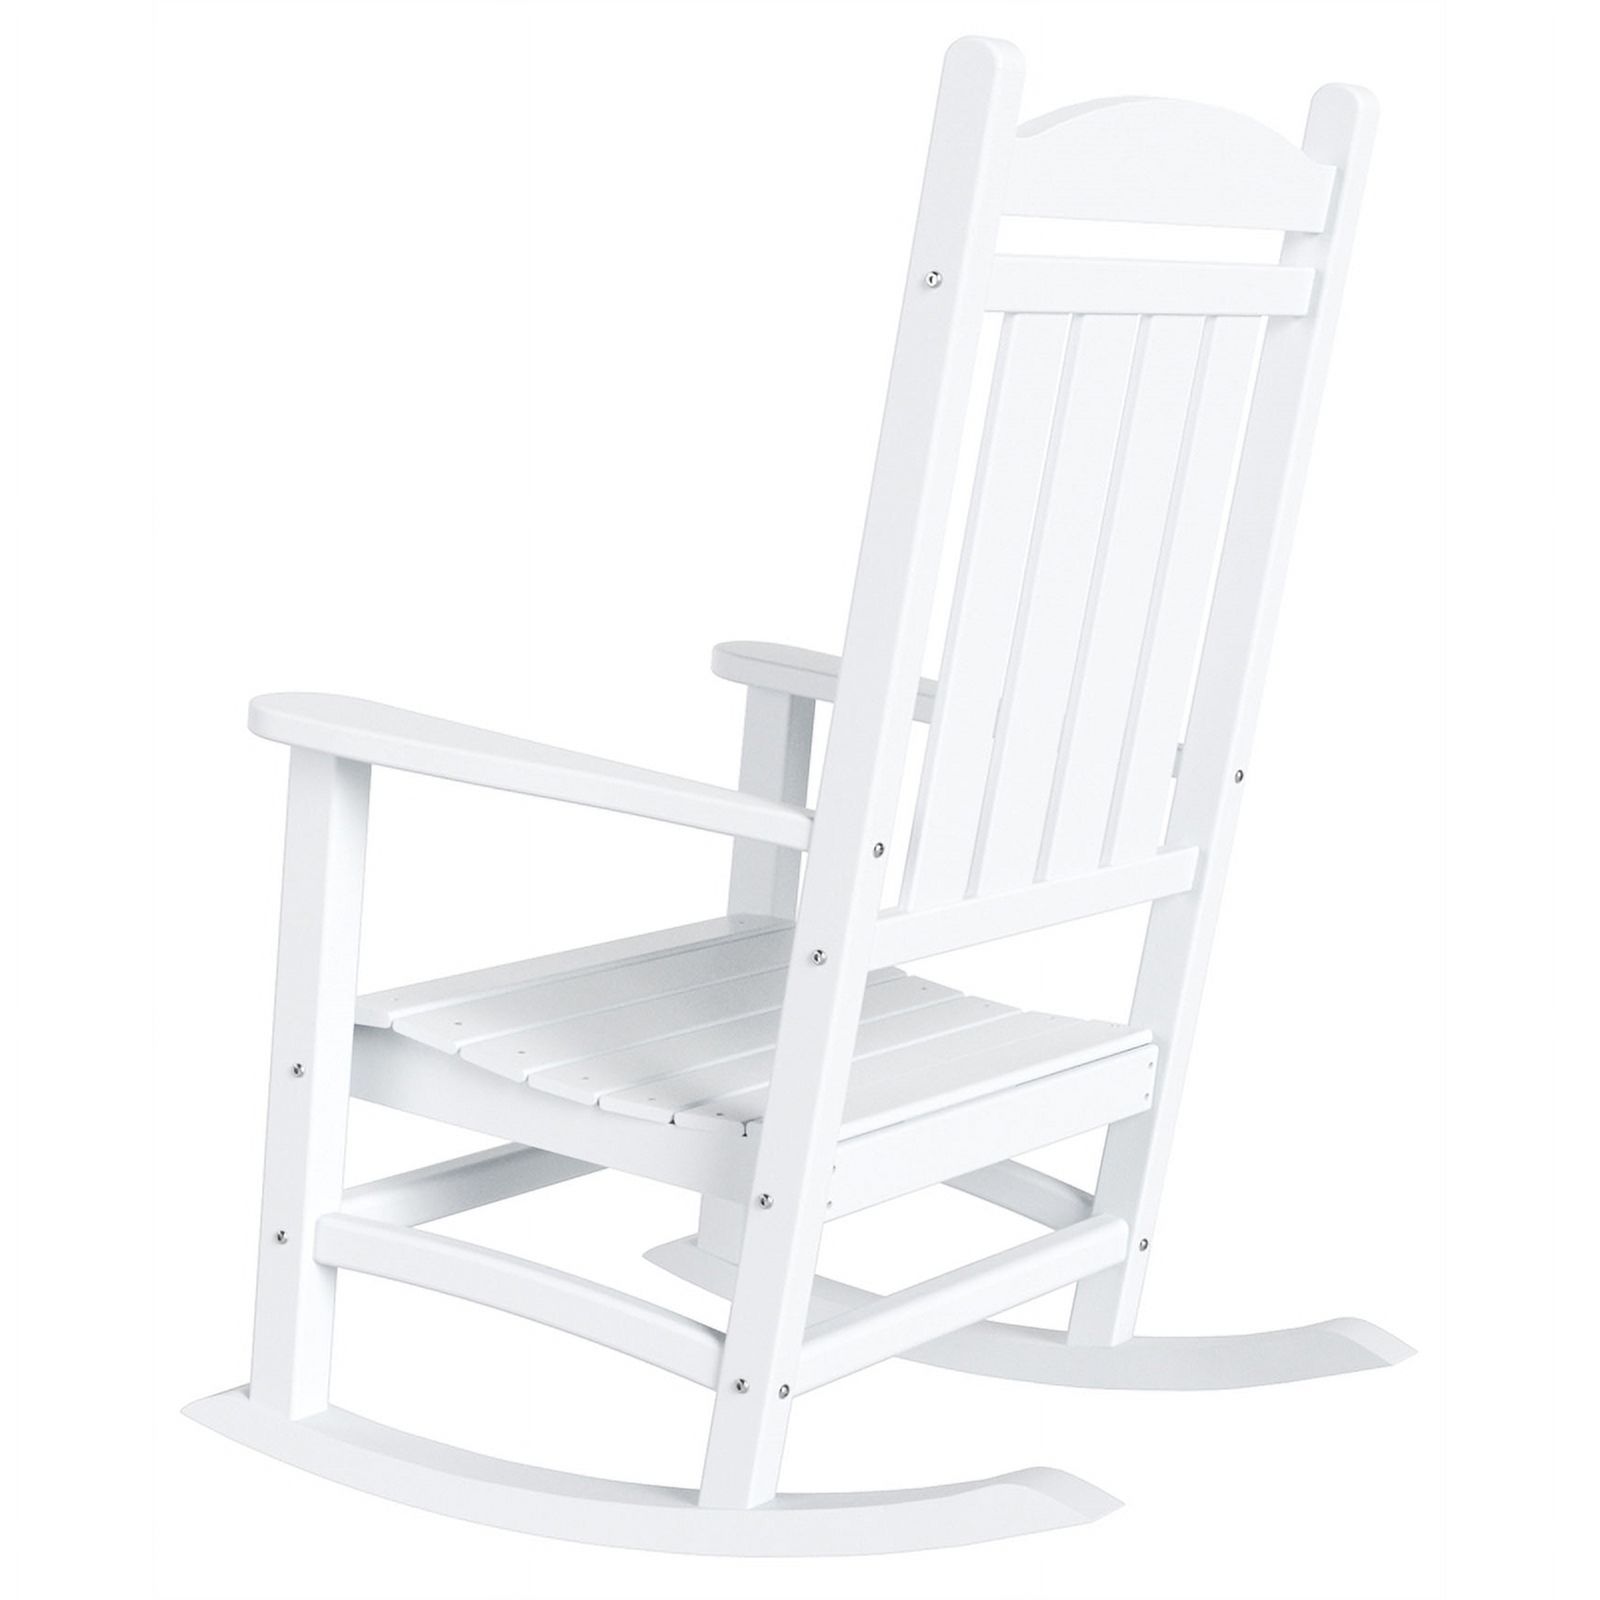 Hastings Classic Rocking Chair With Side Table 3-Piece Set - image 5 of 7